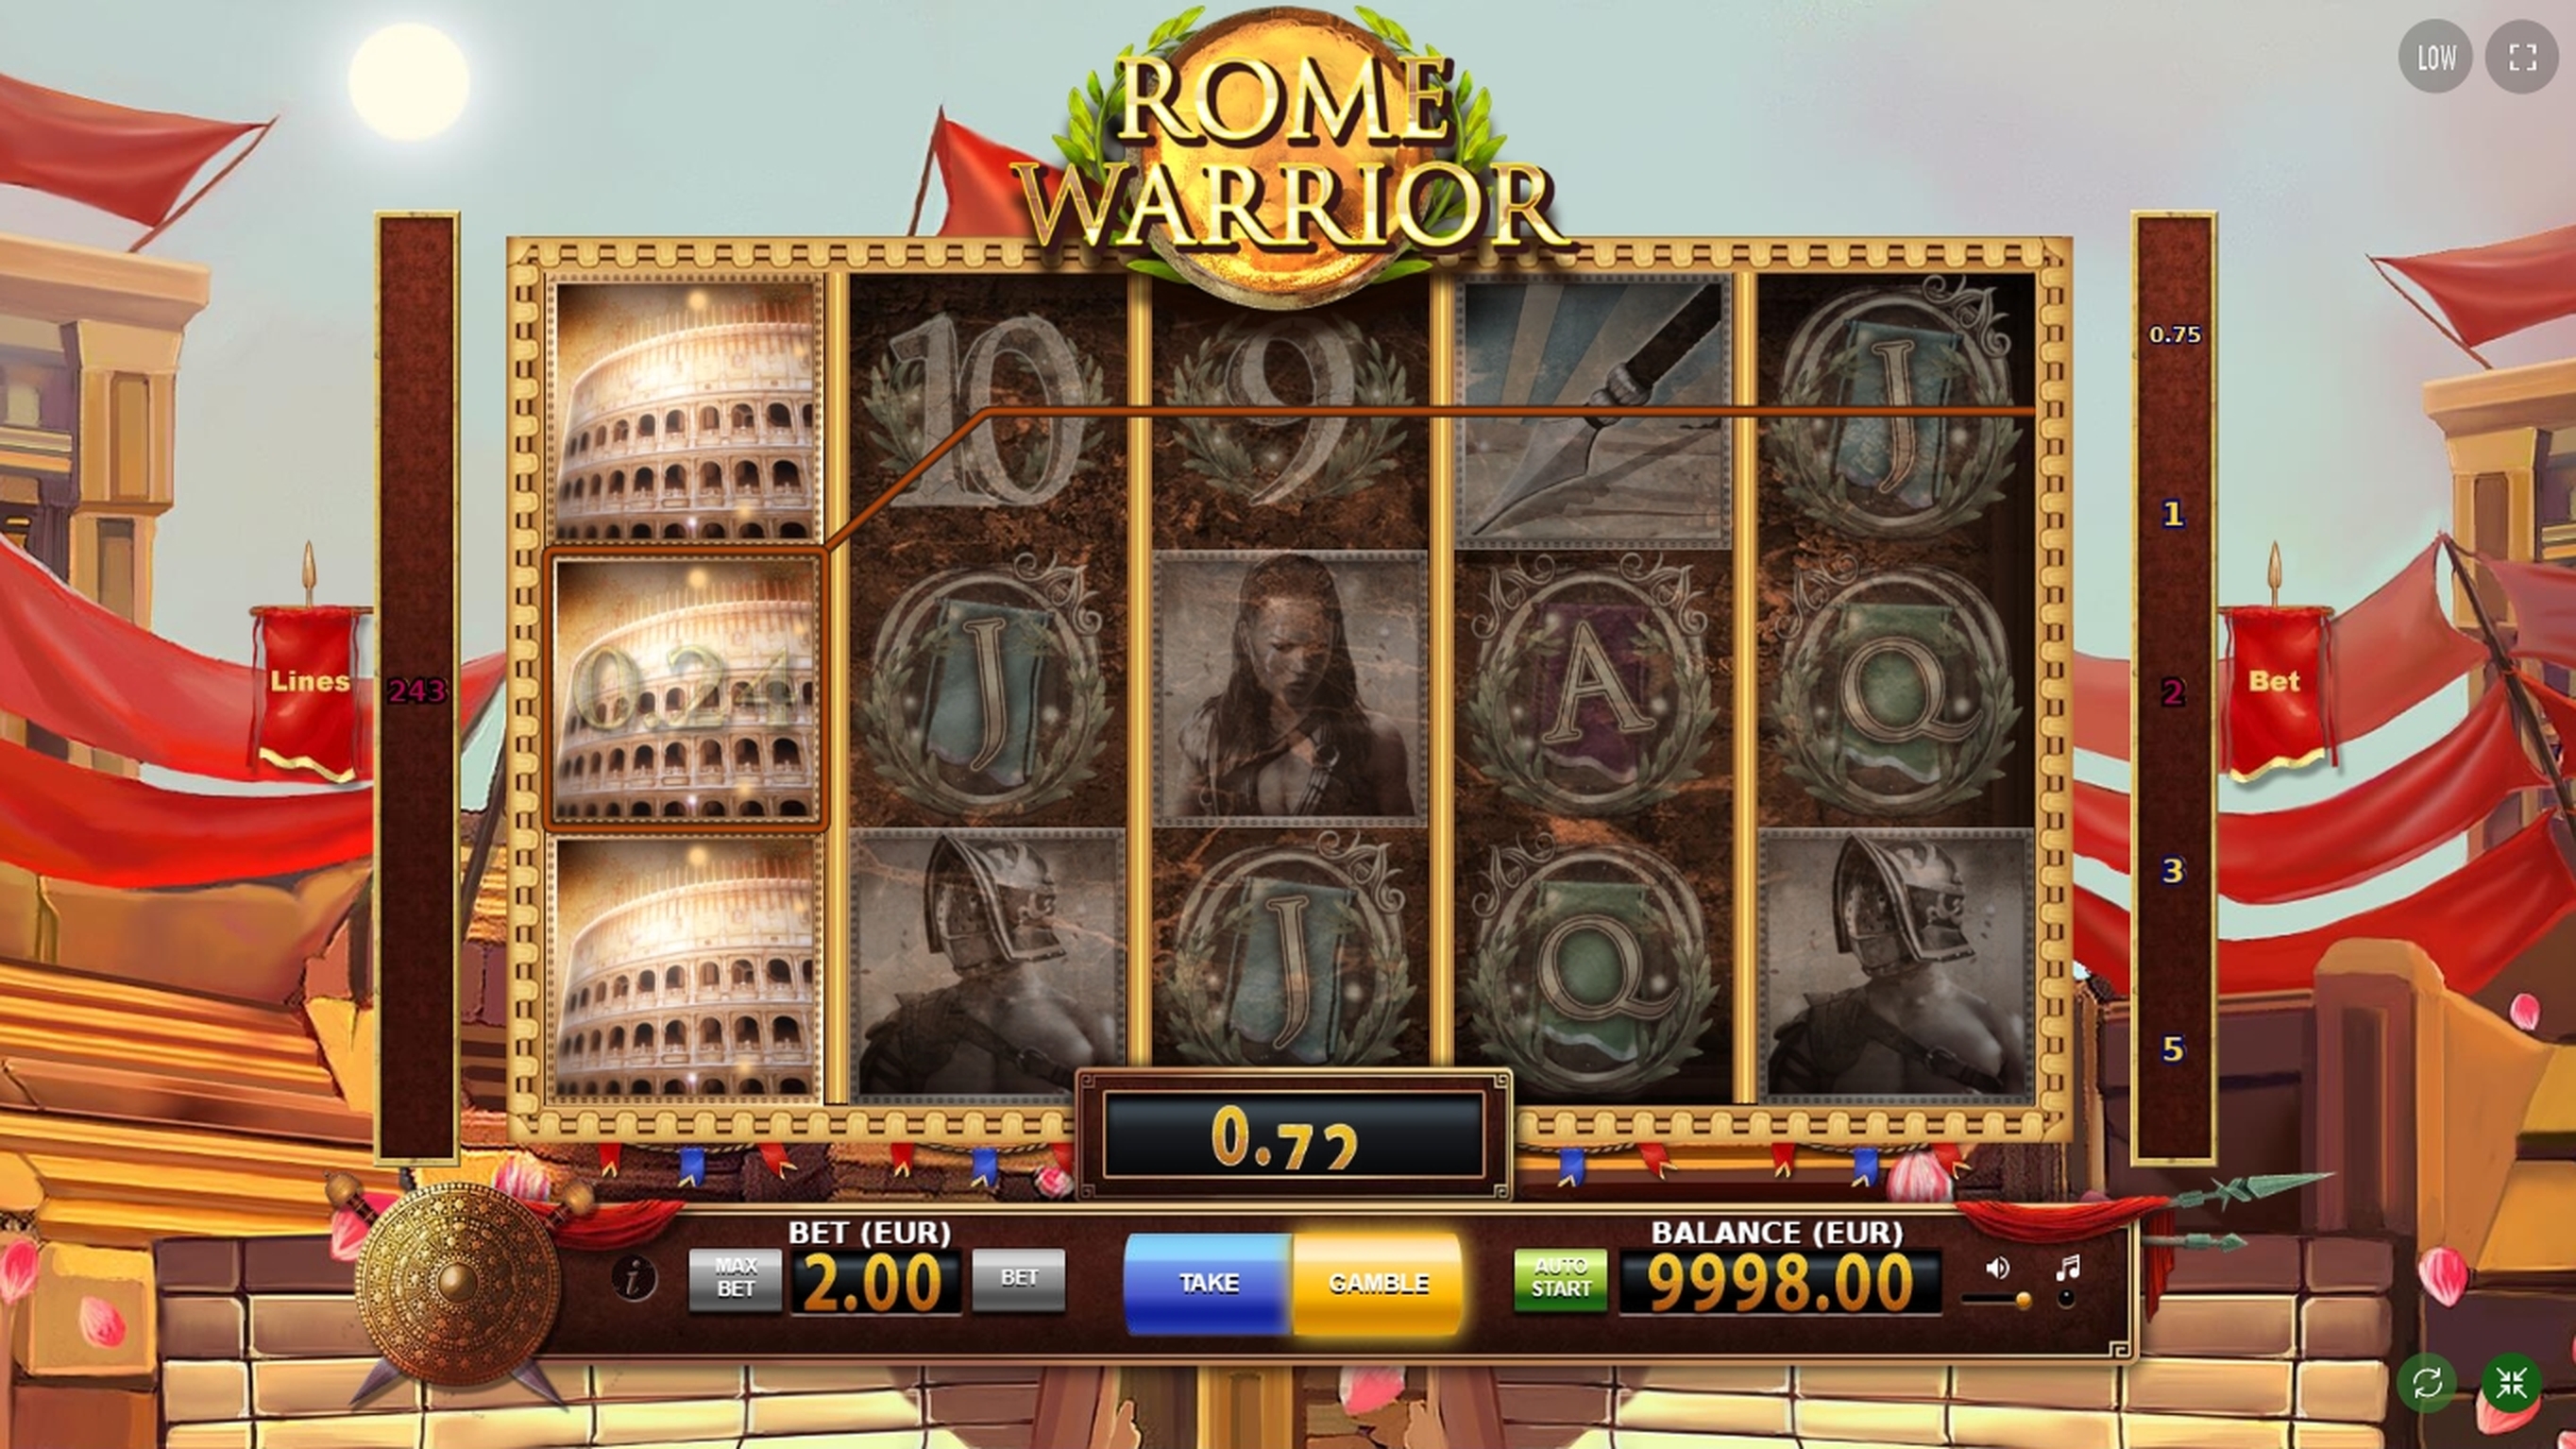 Win Money in Rome Warrior Free Slot Game by BF Games